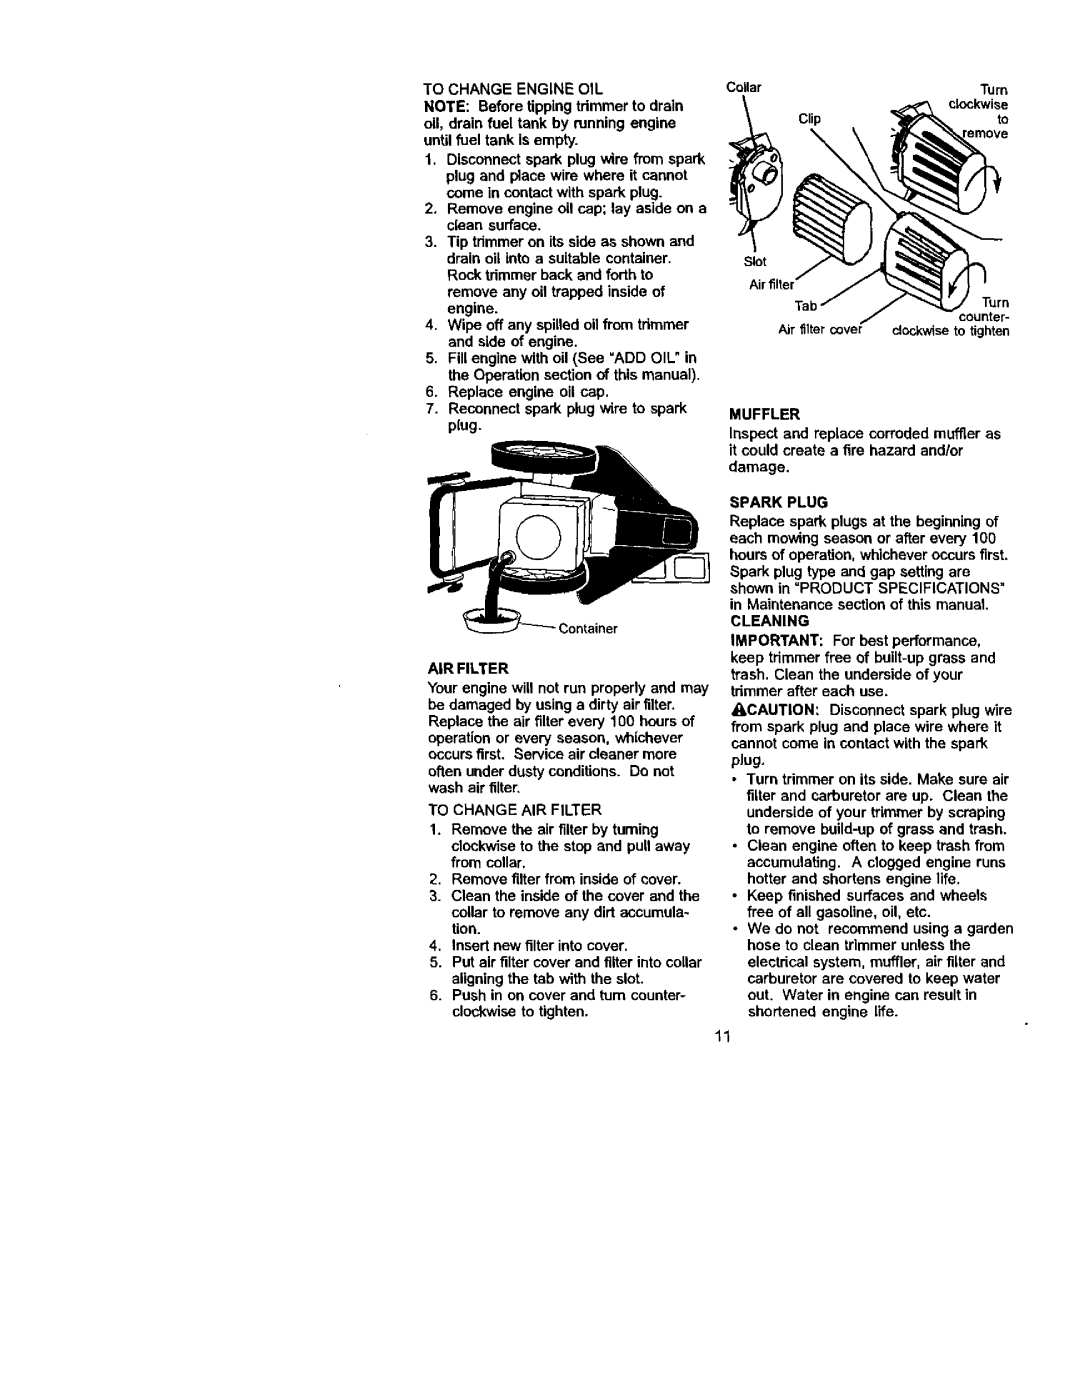 Craftsman 917.773423 owner manual comeincontact with spark plug 